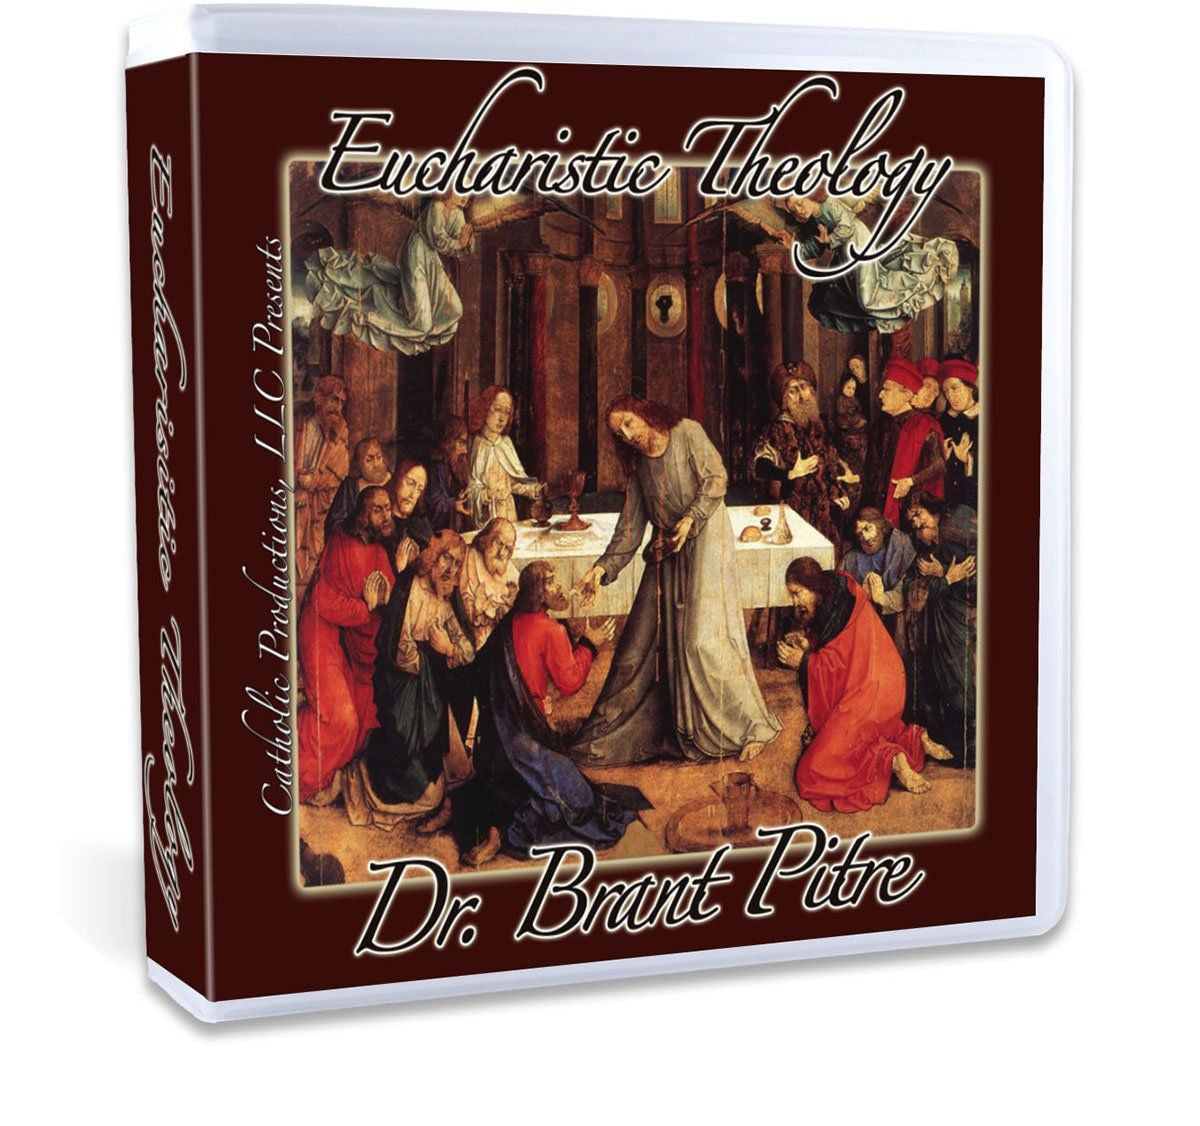 A thorough Biblical and historical study of the Eucharist with Dr. Brant Pitre CD